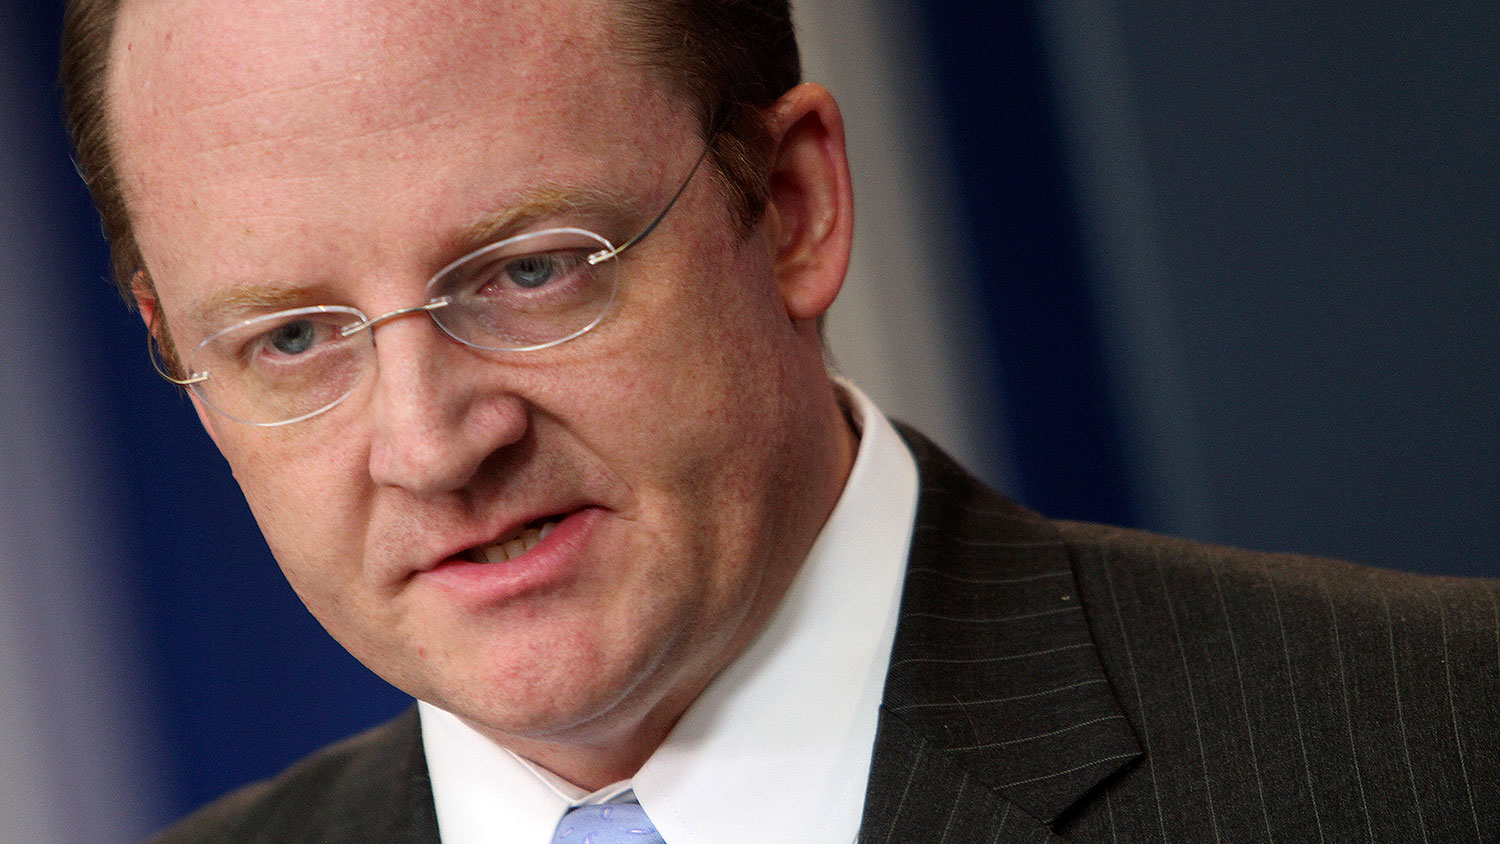 Robert Gibbs, White House press secretary, speaks during a news conference at the White House in Washington, D.C., U.S., on Wednesday, Jan. 5, 2011.
